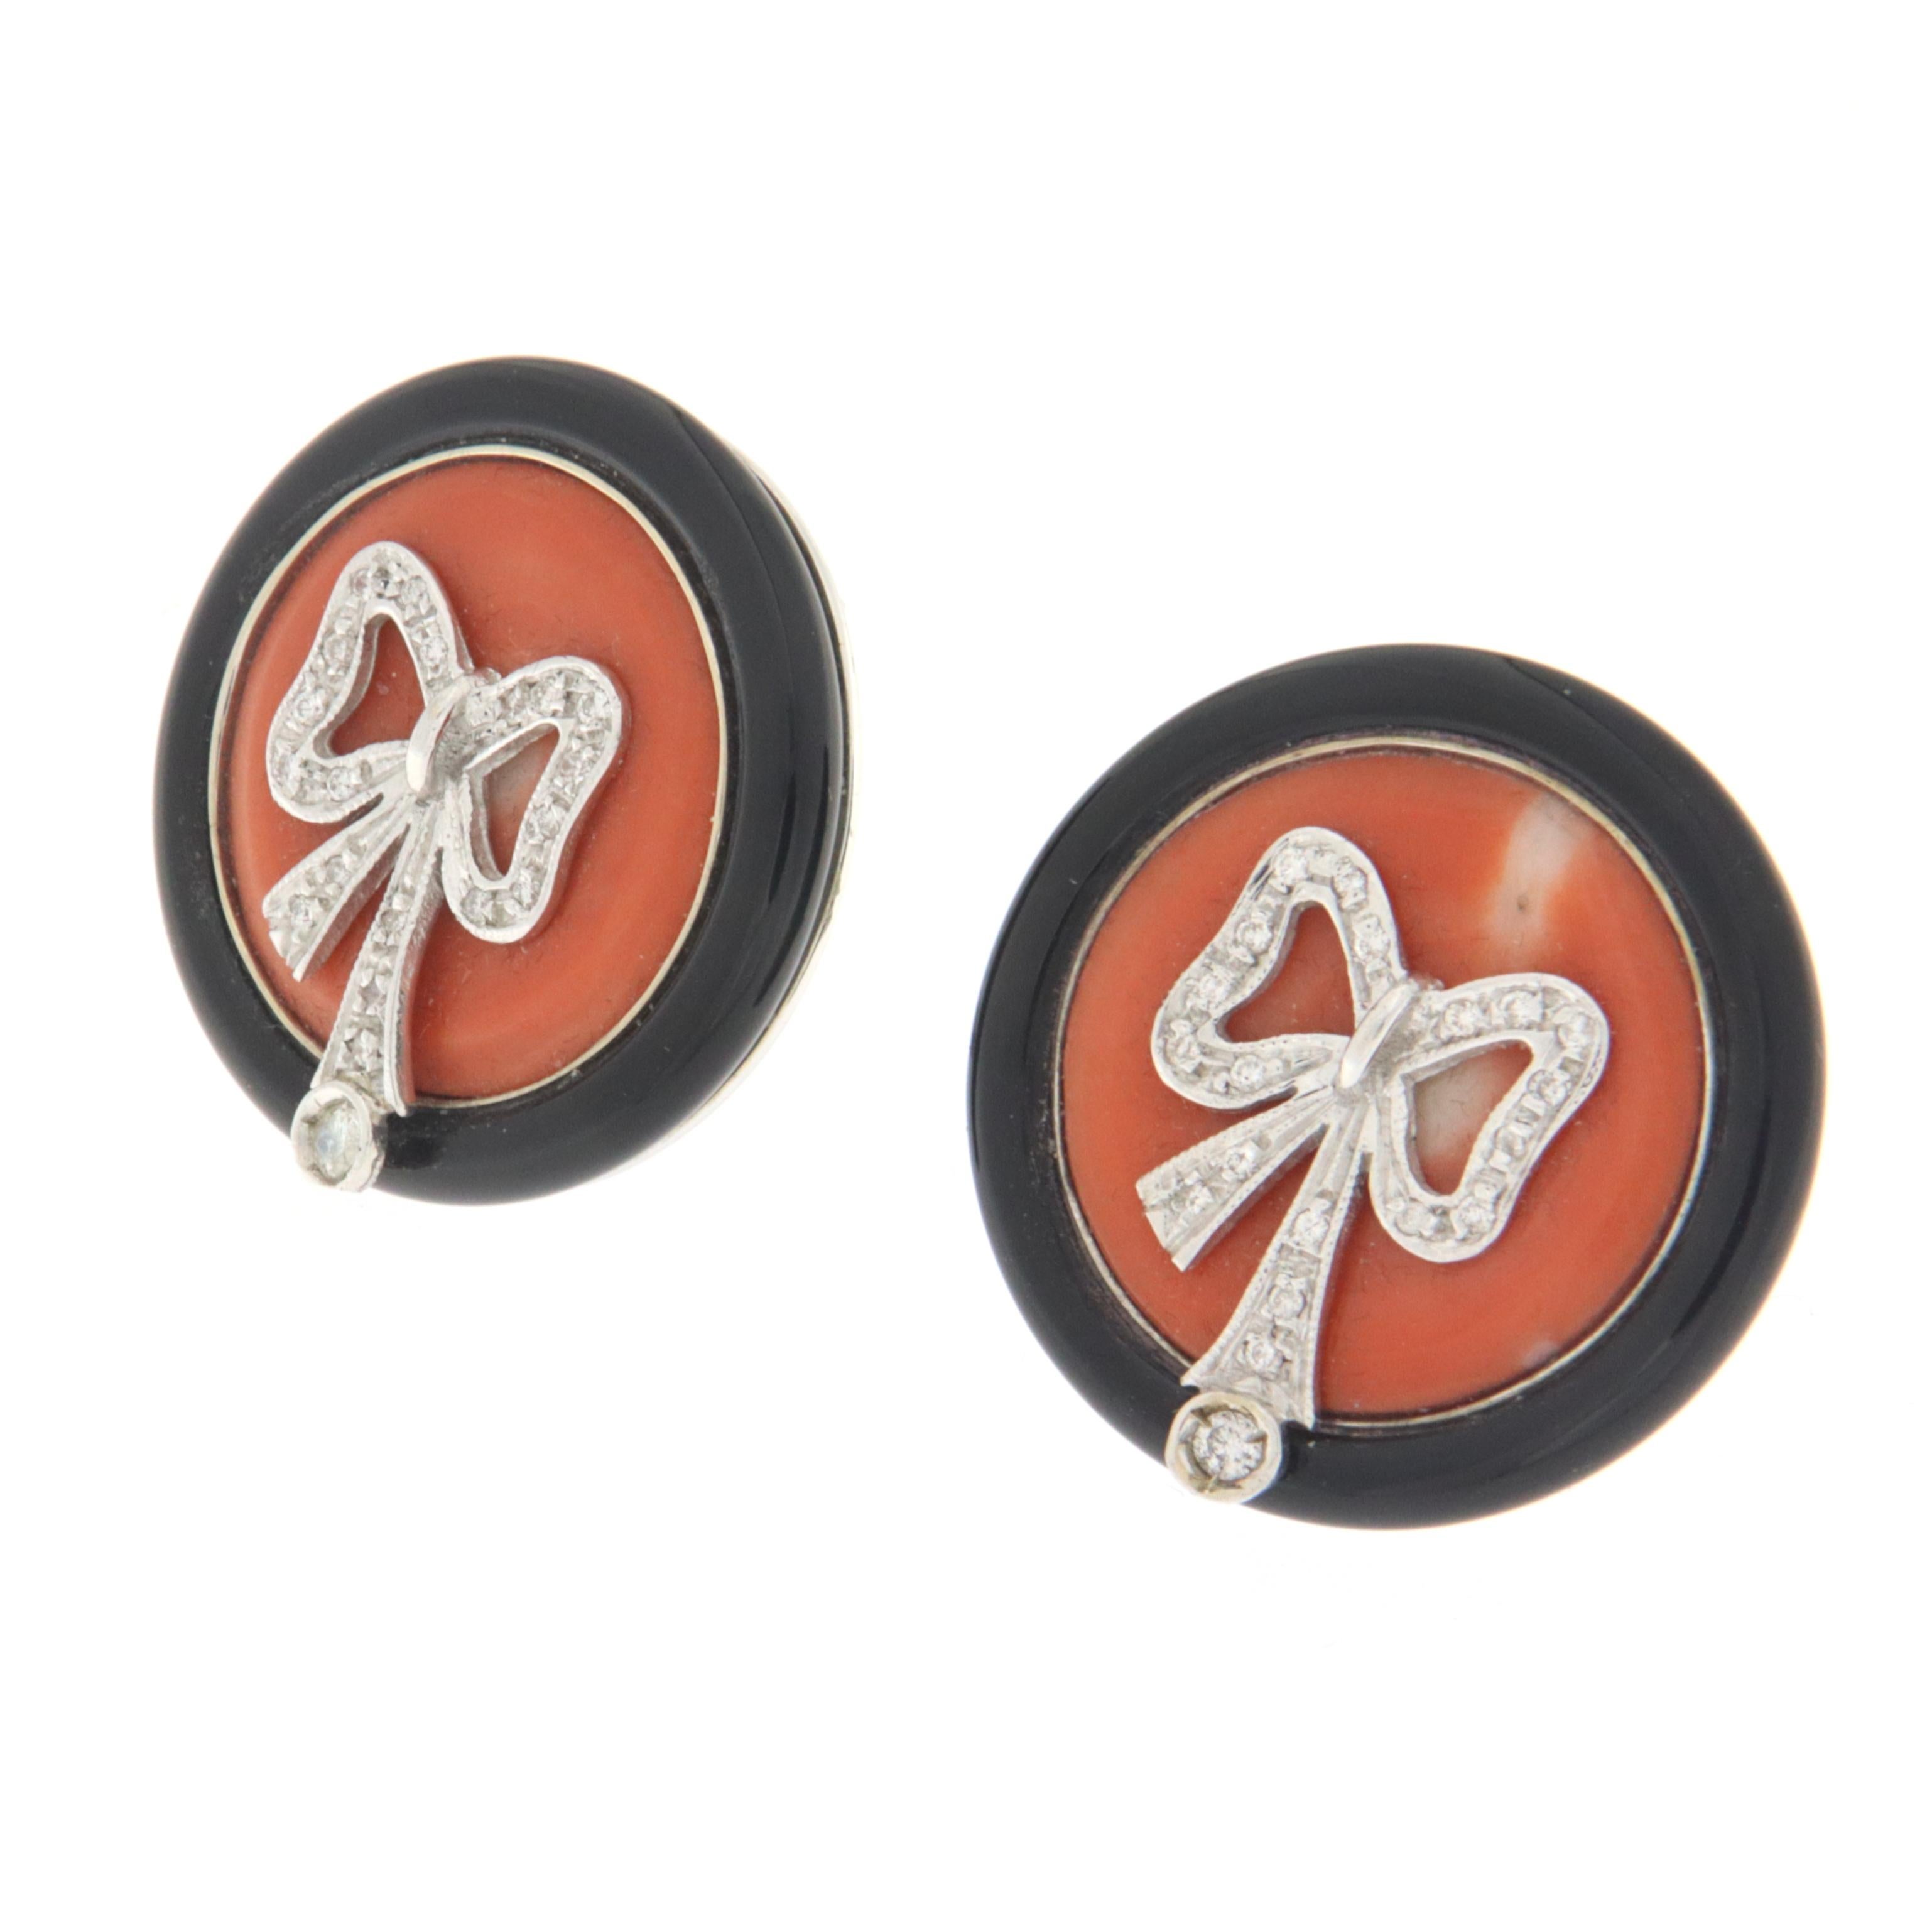 Magnificent earring created entirely by hand by skilled goldsmiths of Naples in 18k white gold mounted with coral onyx and diamonds.
An elegant earring that can also be displayed for less important occasions, a jewel that any woman would like to